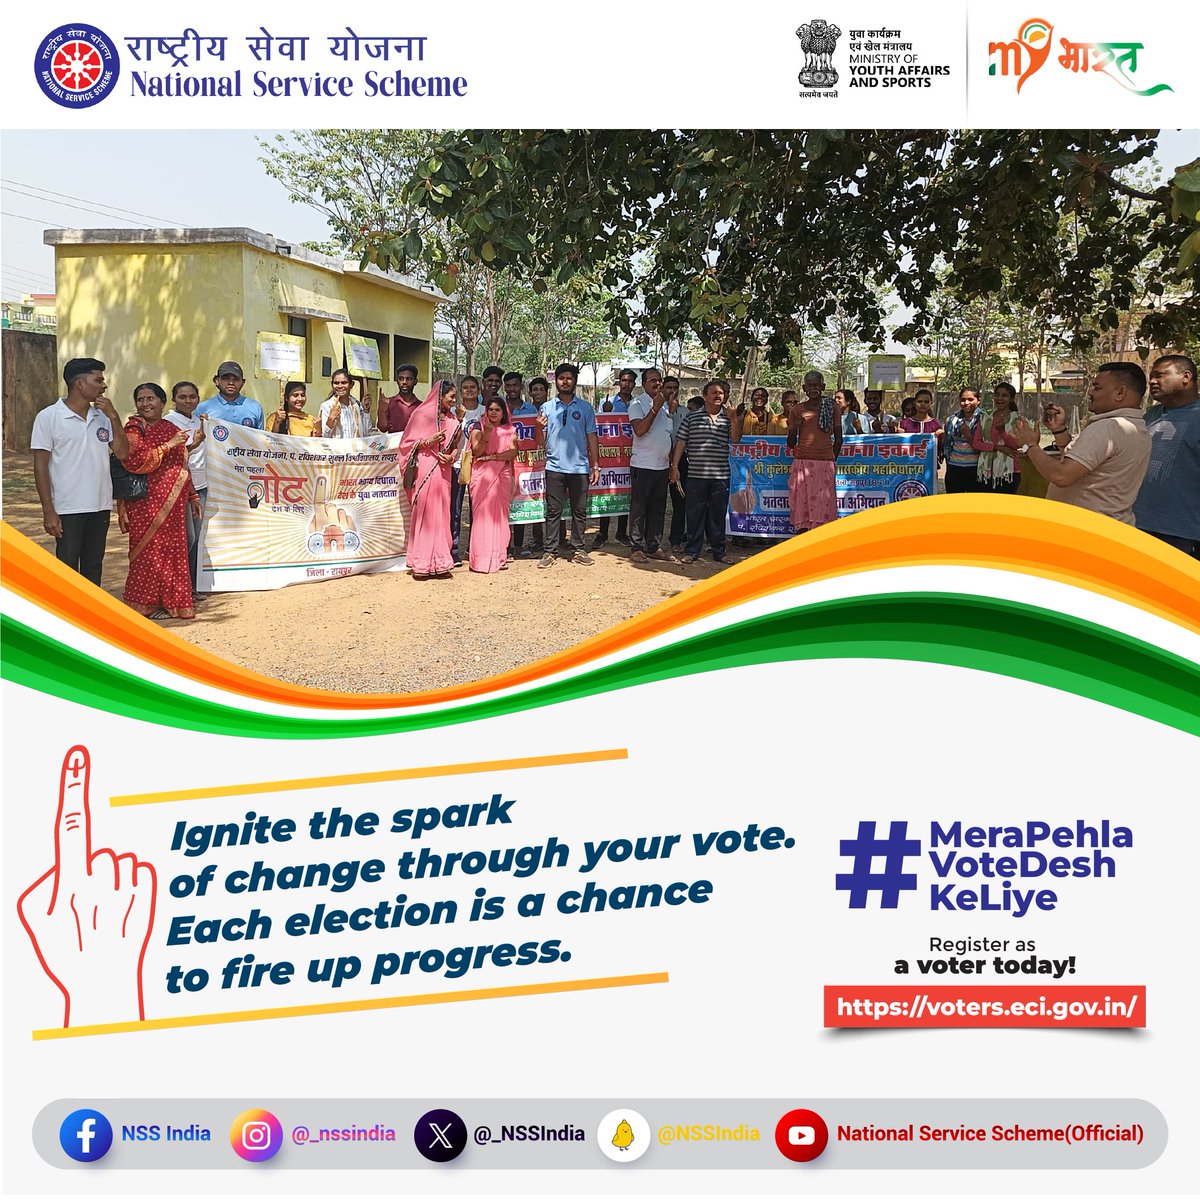 Every election is a golden opportunity to ignite progress and make a difference. Your vote holds the power to bring about the change you wish to see! #voterawareness #MeraPehlaVoteDeshKeLiye #Vote4Sure